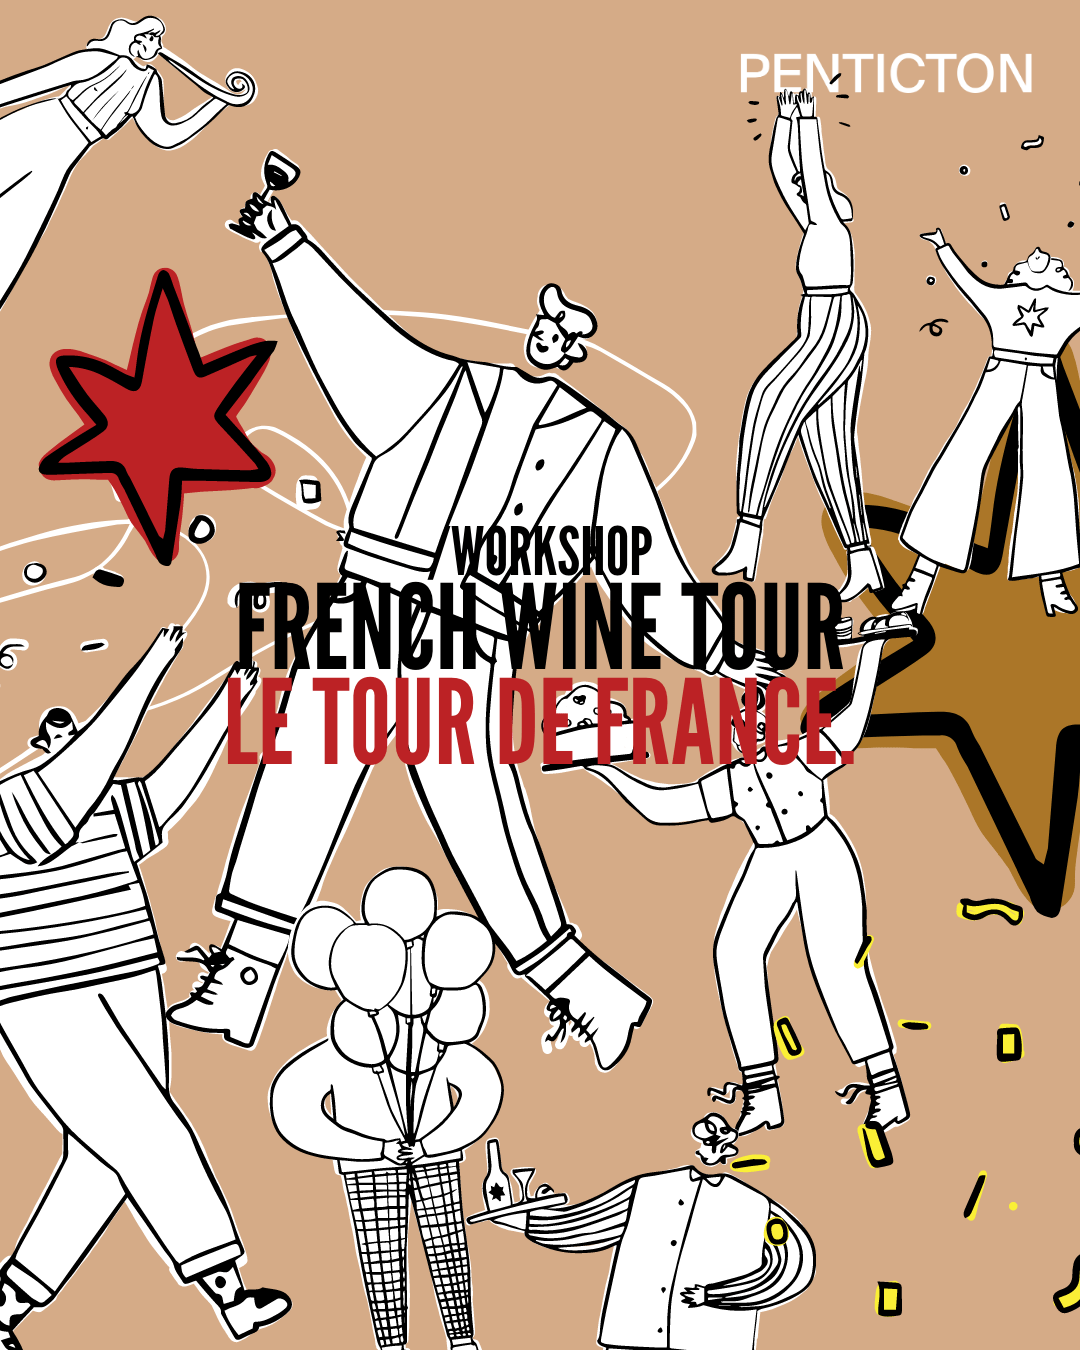 Penticton-Event-A-French-Wine-Tour